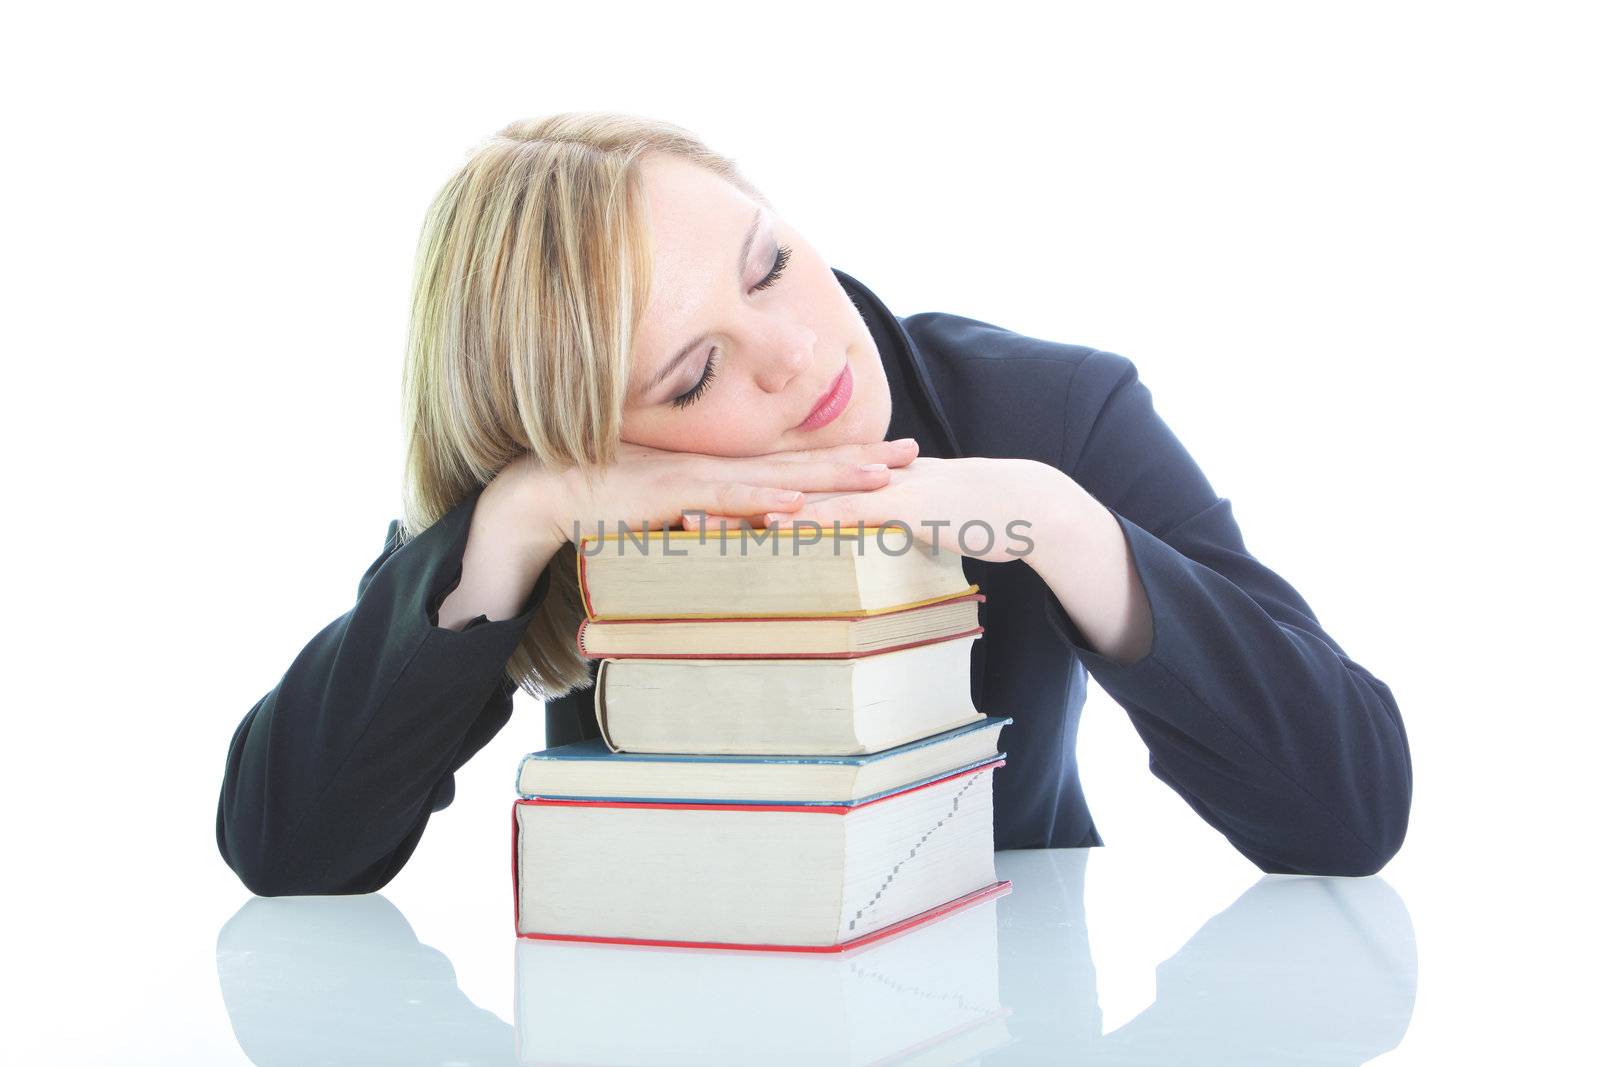 Tired blonde woman sleeping on books Tired blonde woman sleeping on books by Farina6000